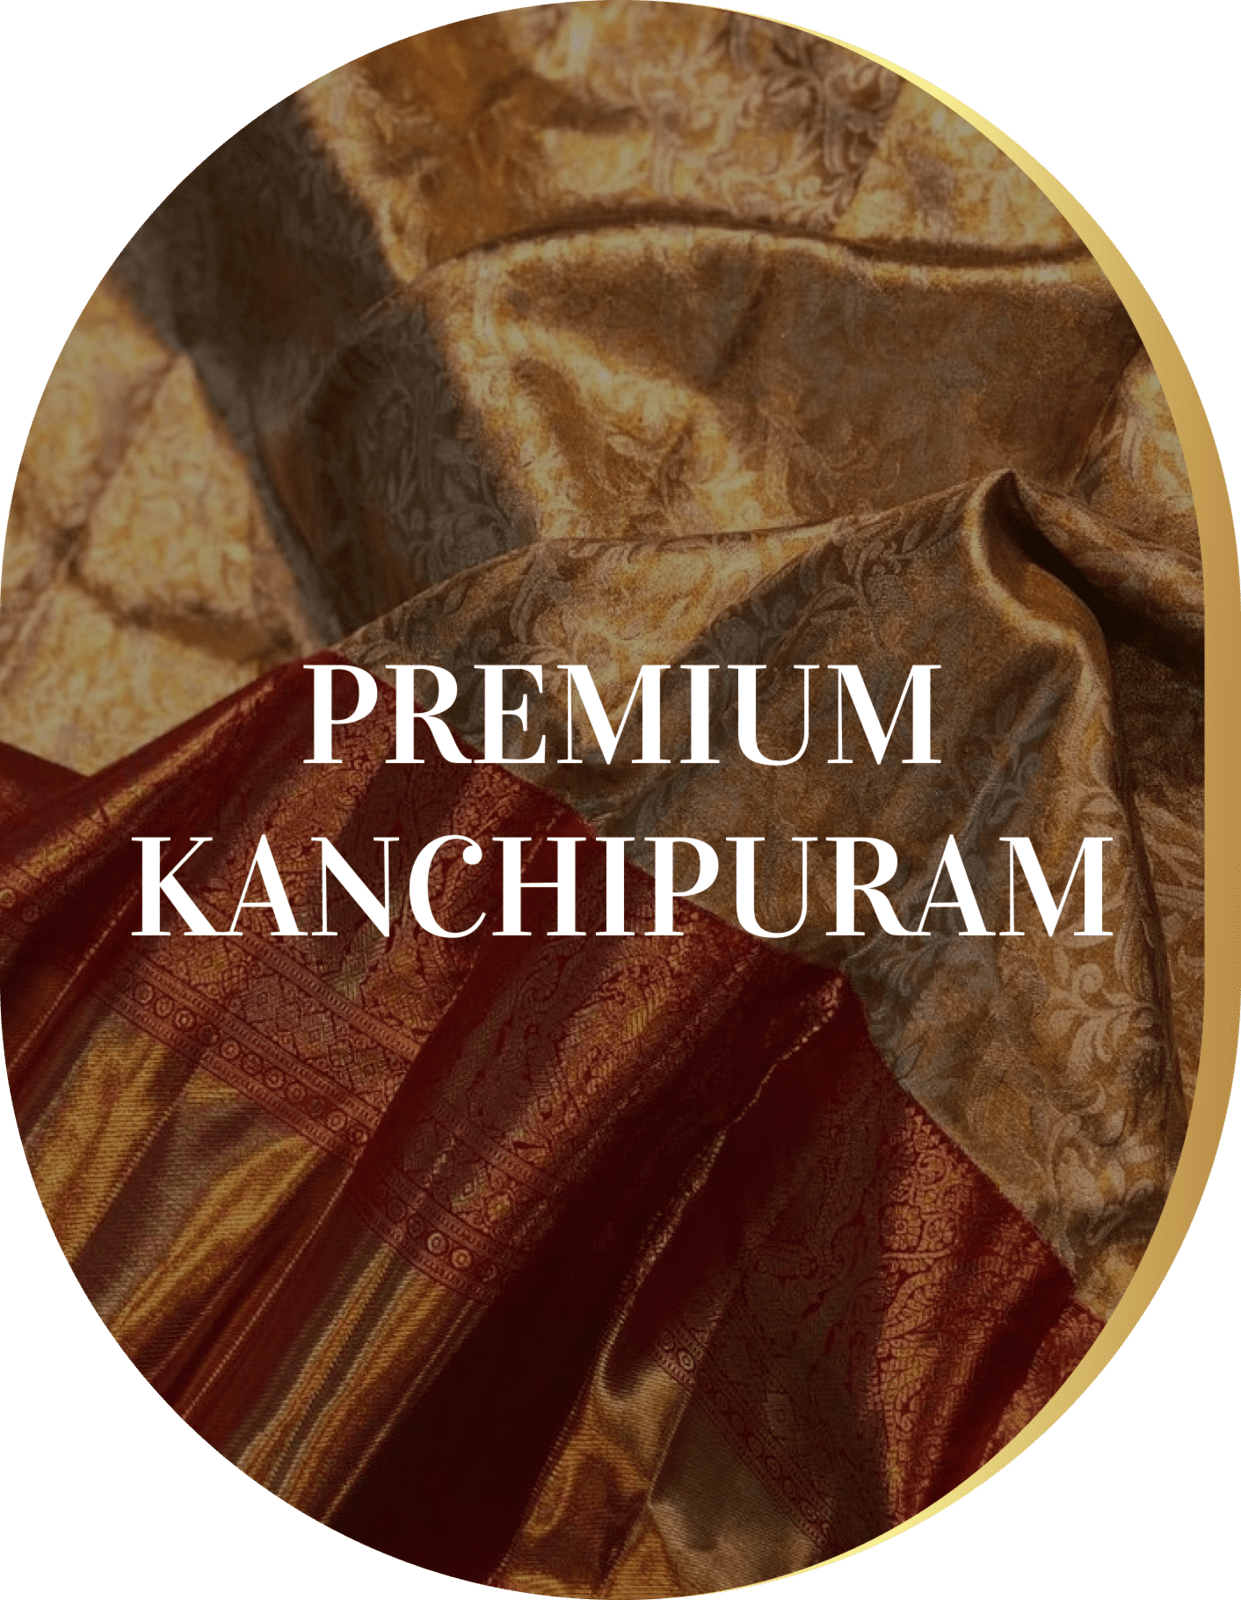 Exquisite kanchipuram silk saree, showcasing the rich cultural heritage and impeccable craftsmanship of Indian silk sarees.